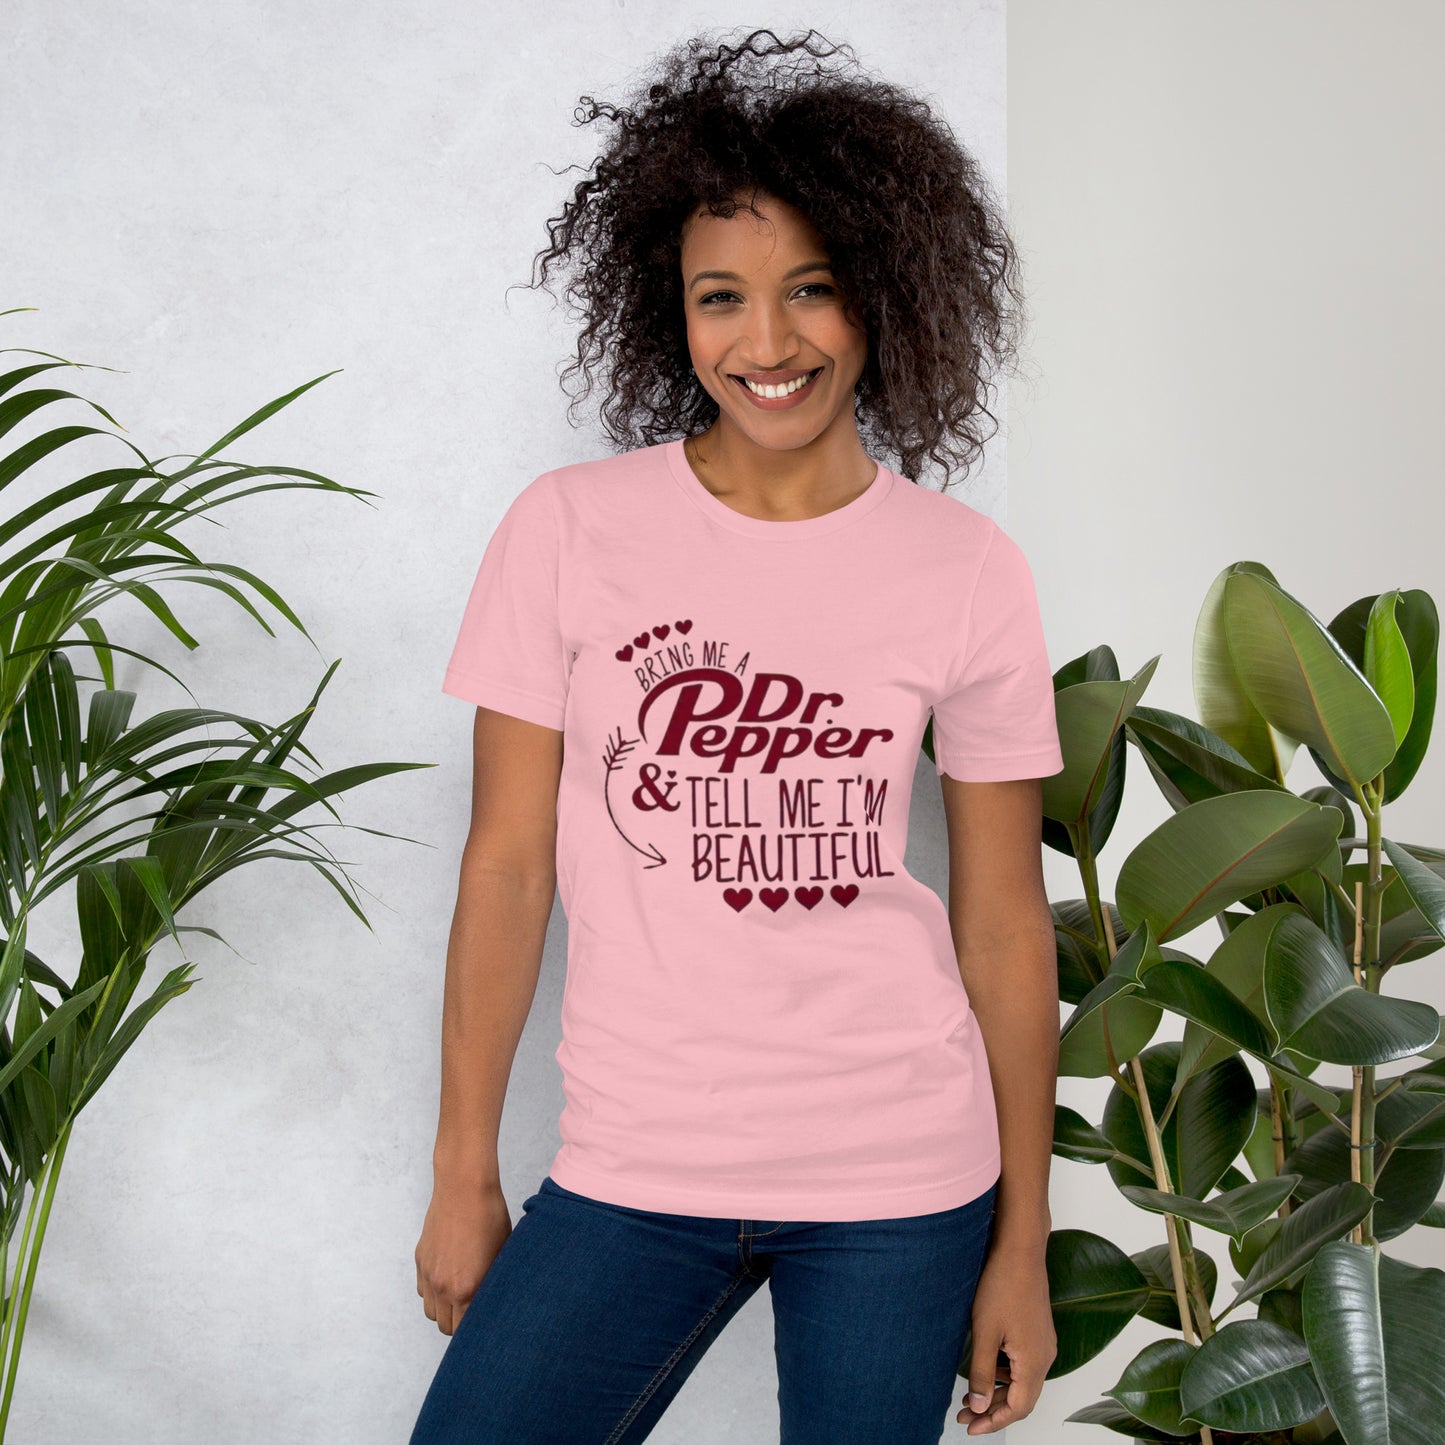 Tell Me I'm Beautiful - Classic Country Tees